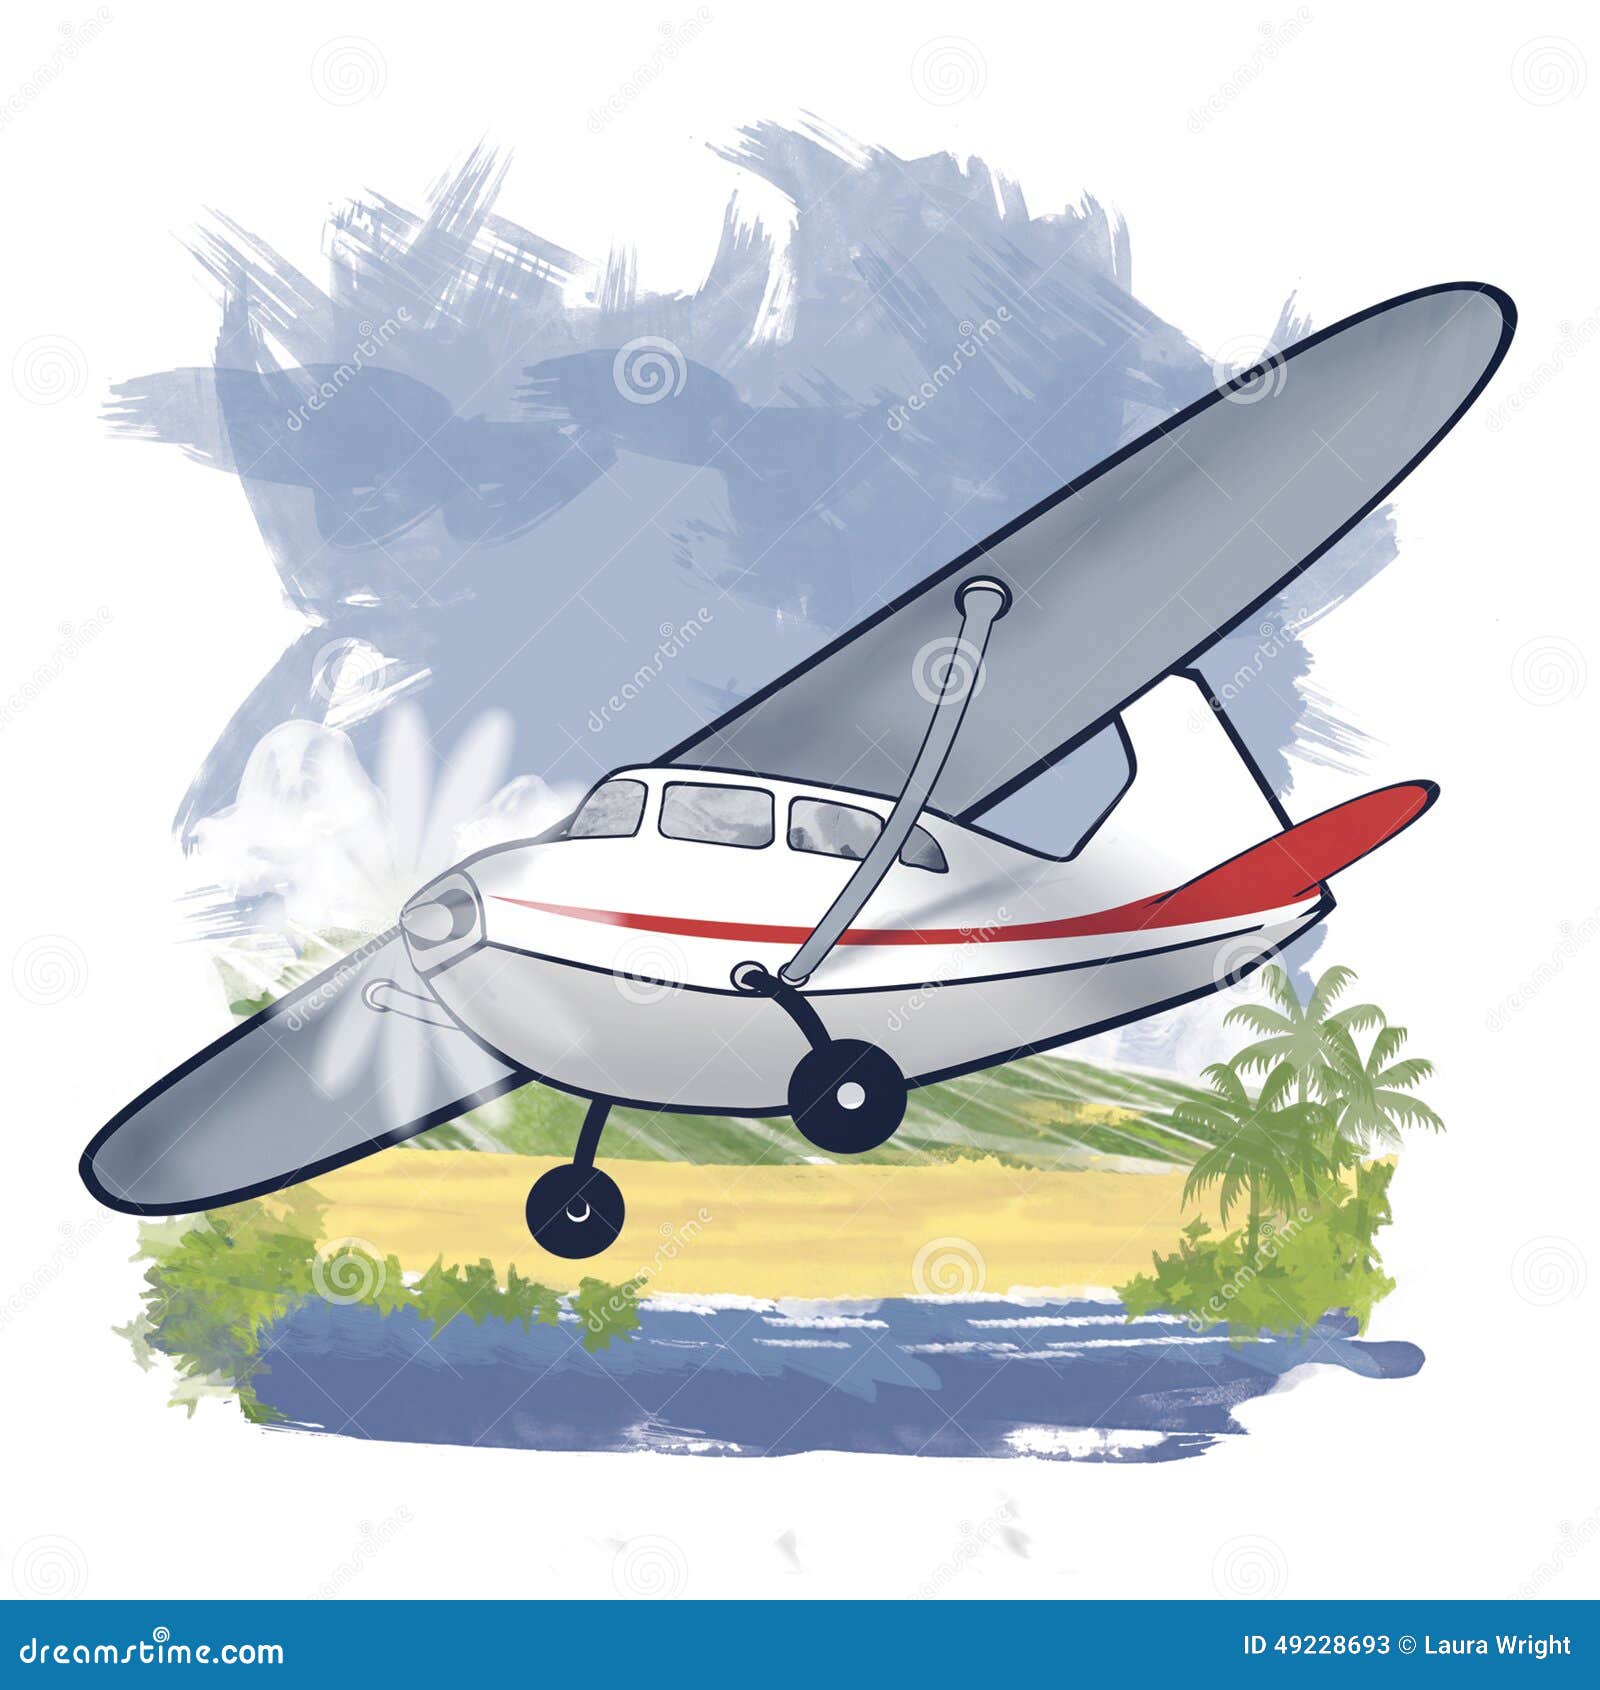 clipart cessna airplane - photo #36